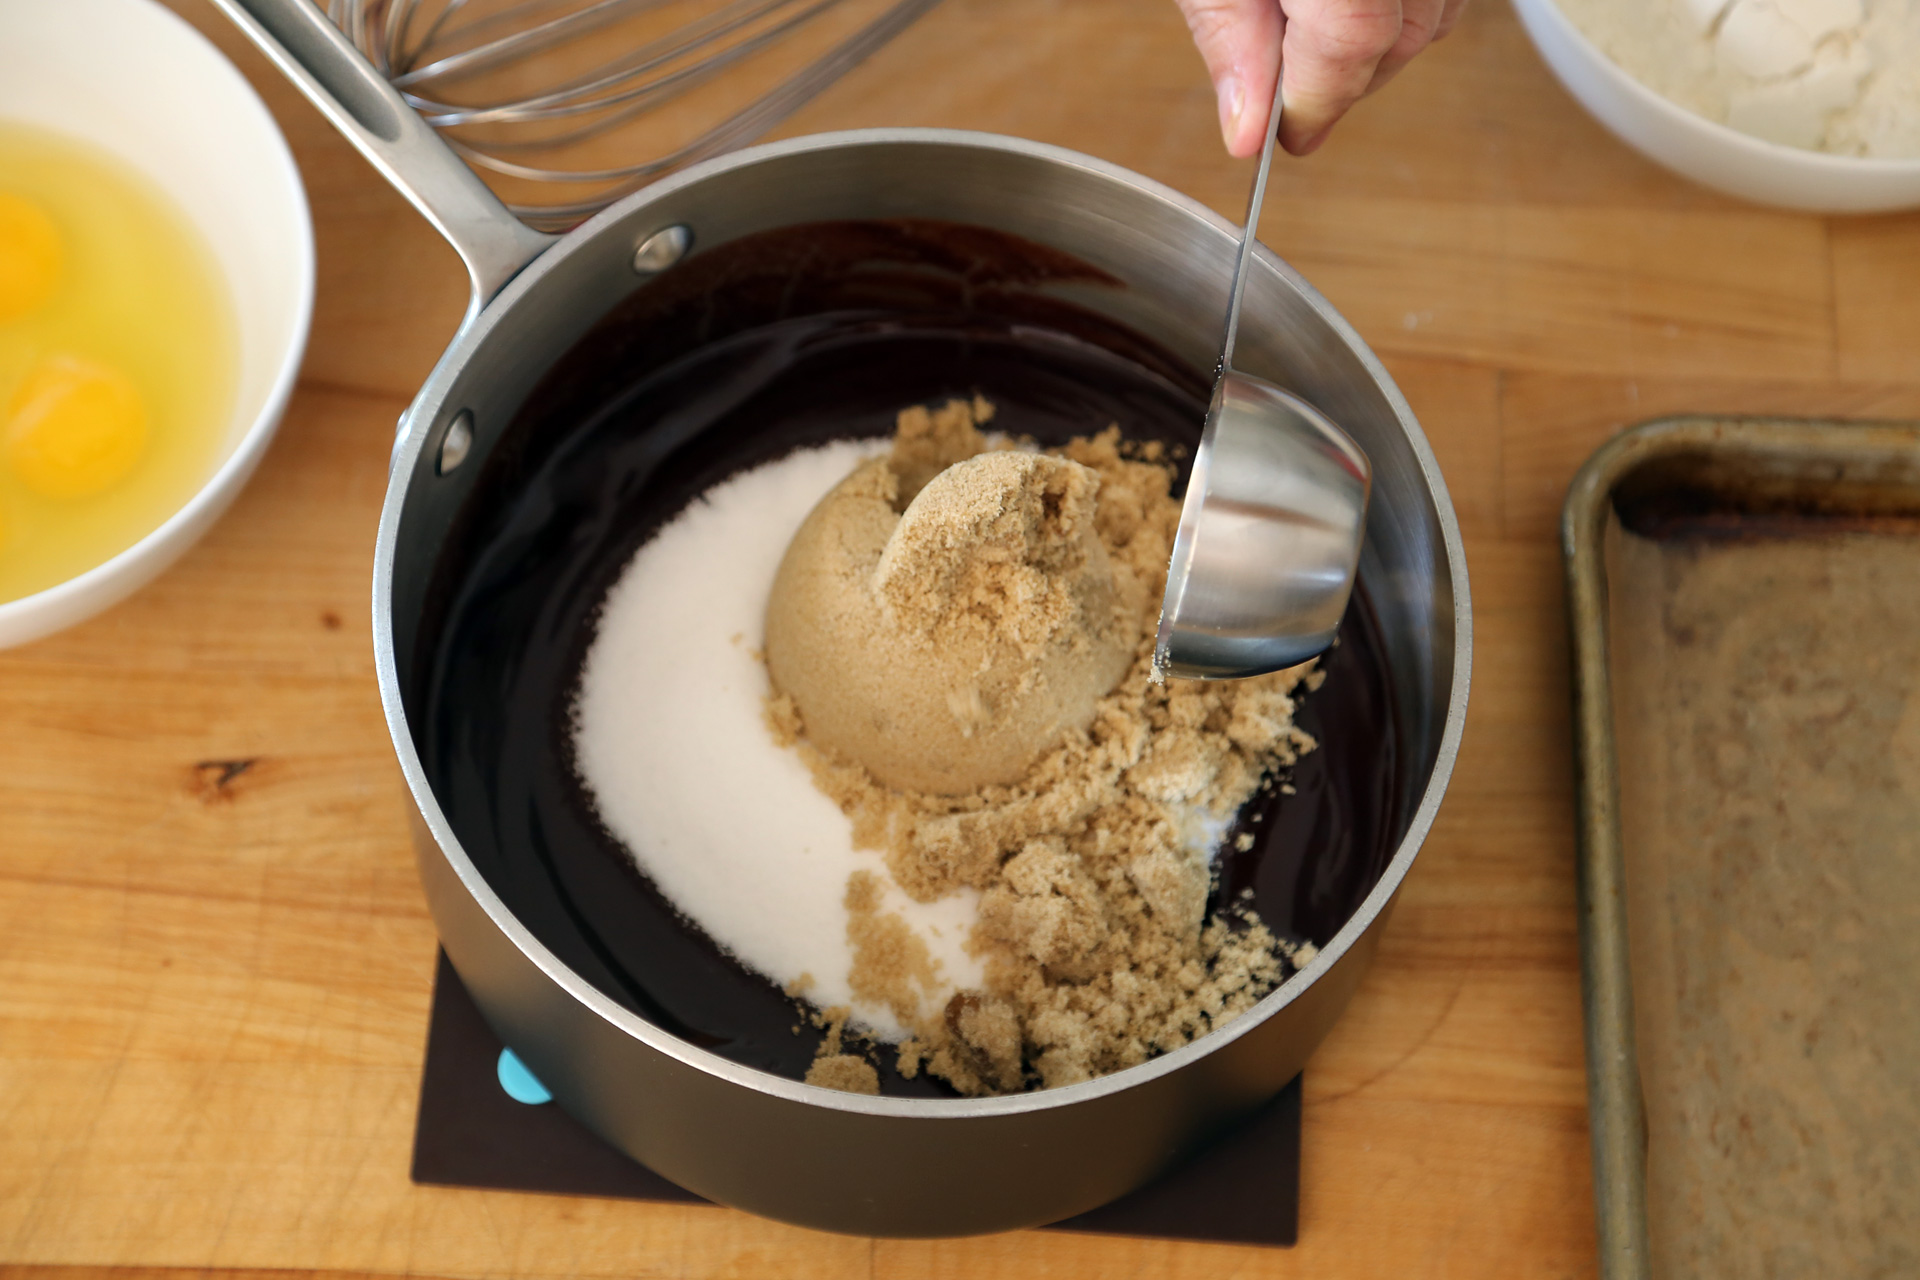 Remove from the heat and stir in the sugars with a whisk.